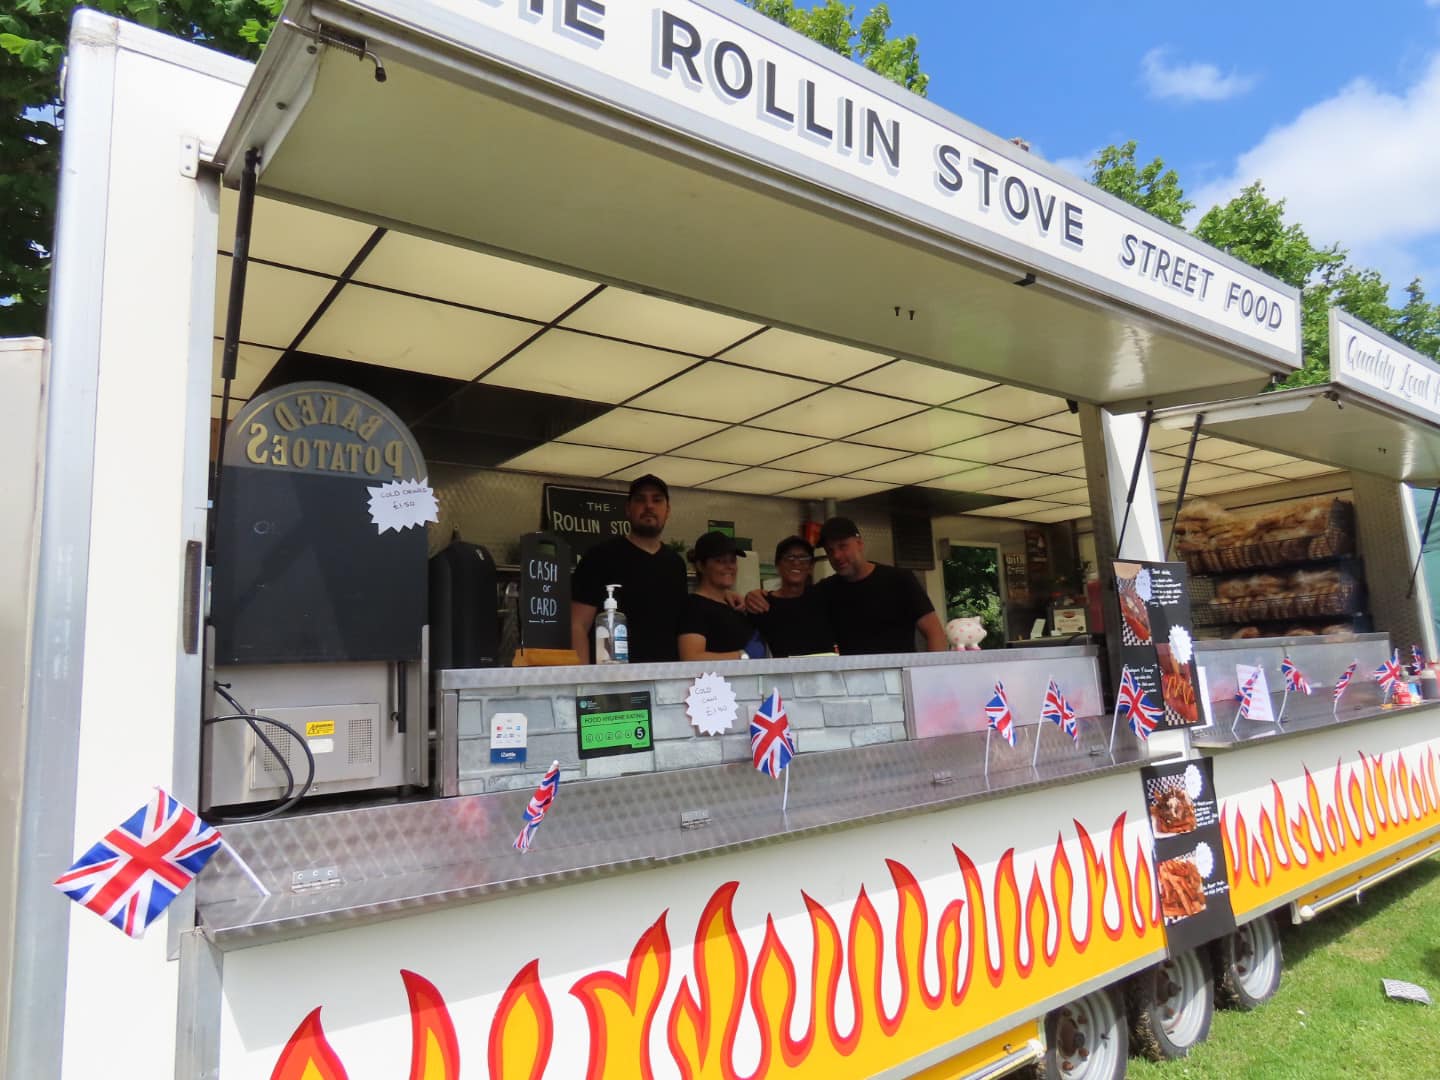 The Rollin Stove from Southport at Southport Food and Drink Festival. Photo by Andrew Brown Media